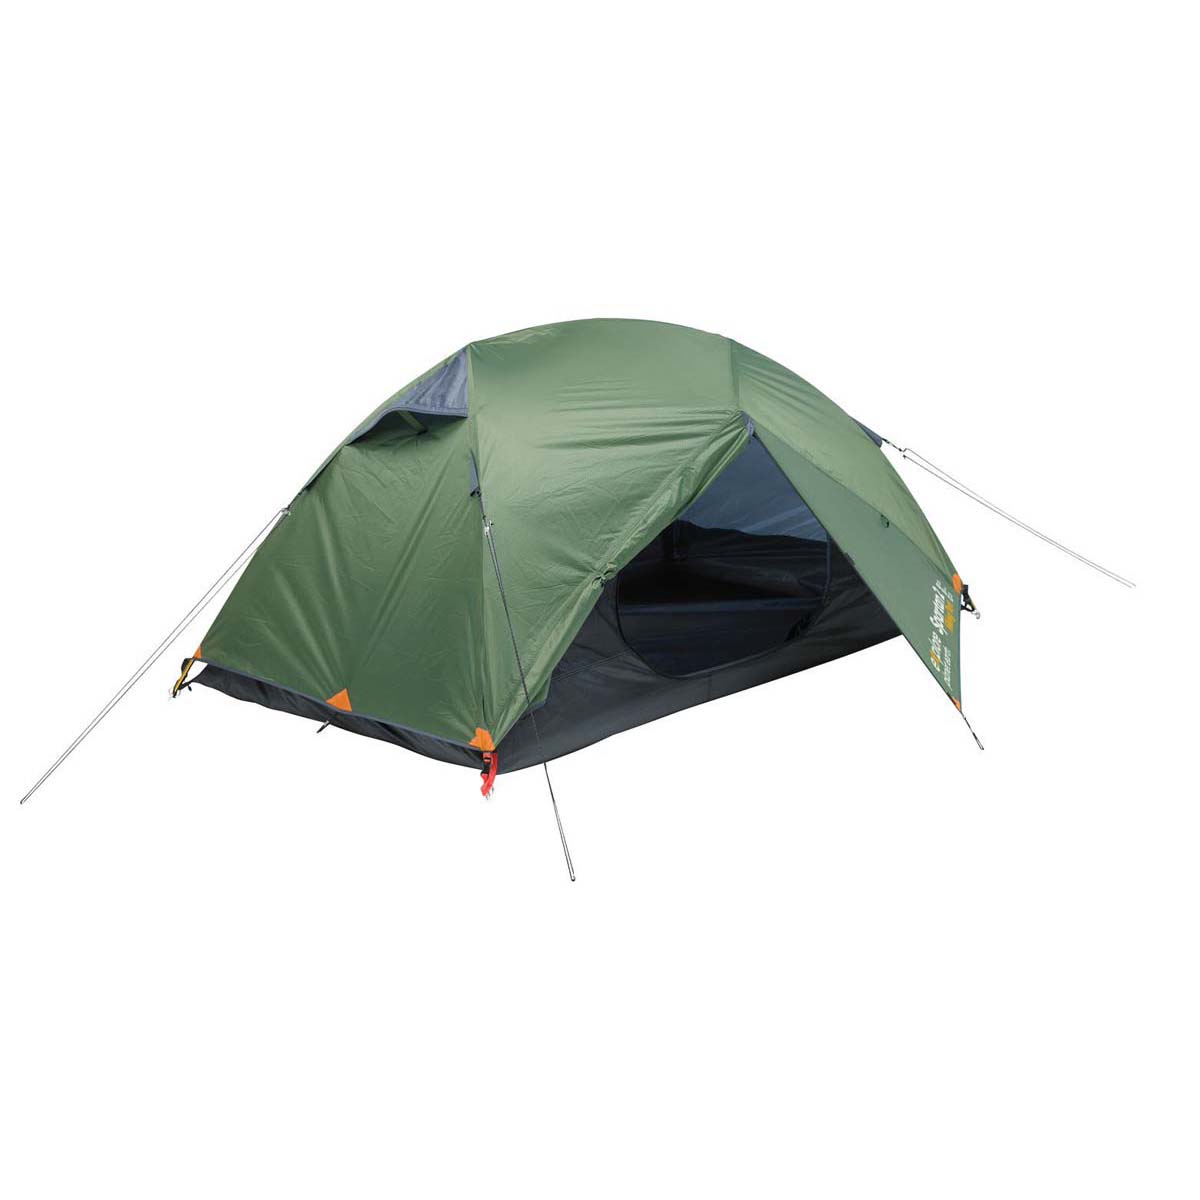 EPE Spartan 2 Person Hike Tent